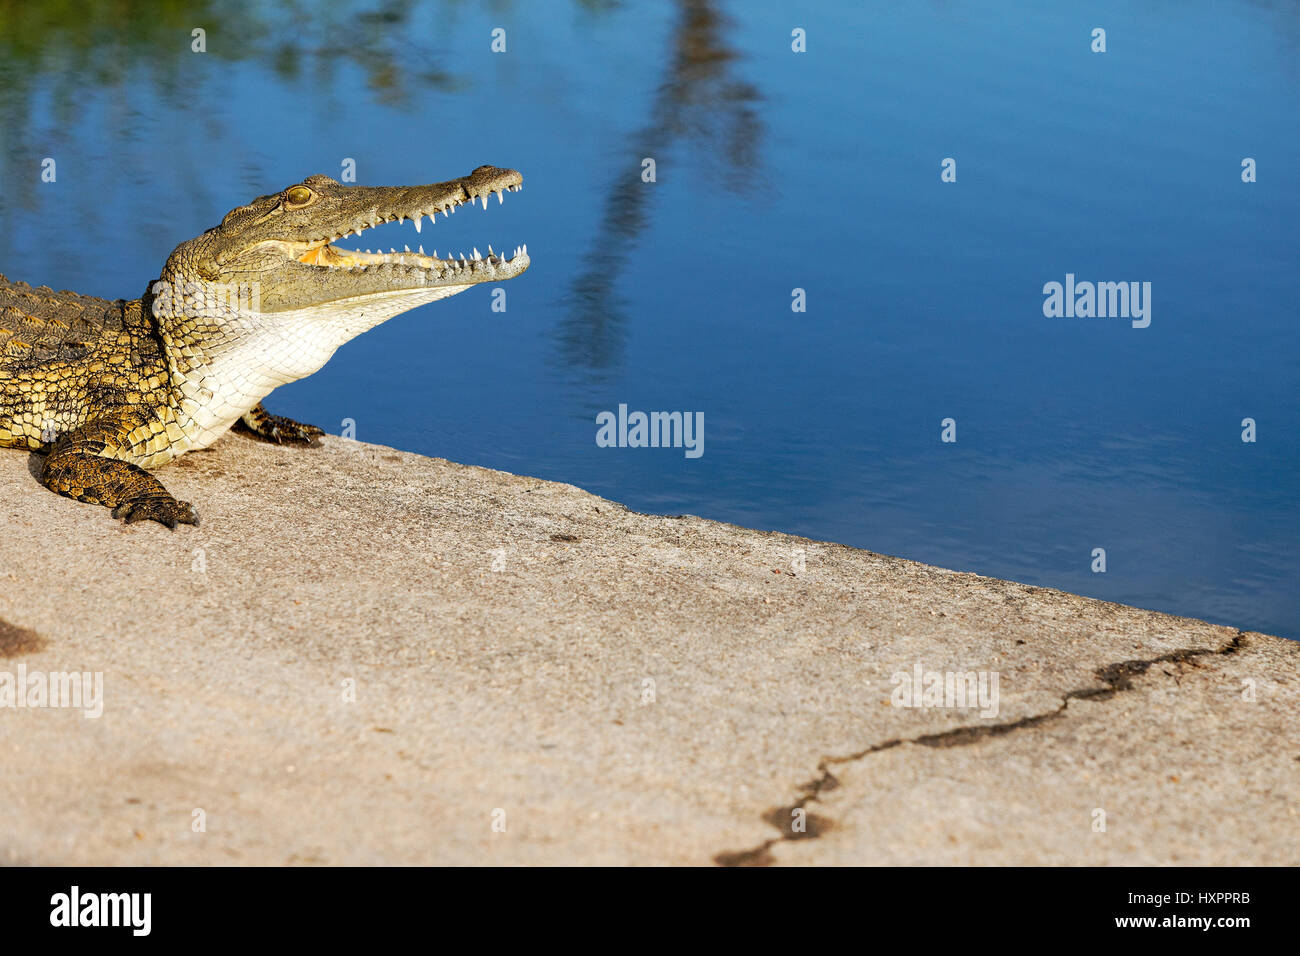 Nile crocodile (Crocodylus niloticus) edge of  water with open mouth, Kruger National Park, South Africa Stock Photo